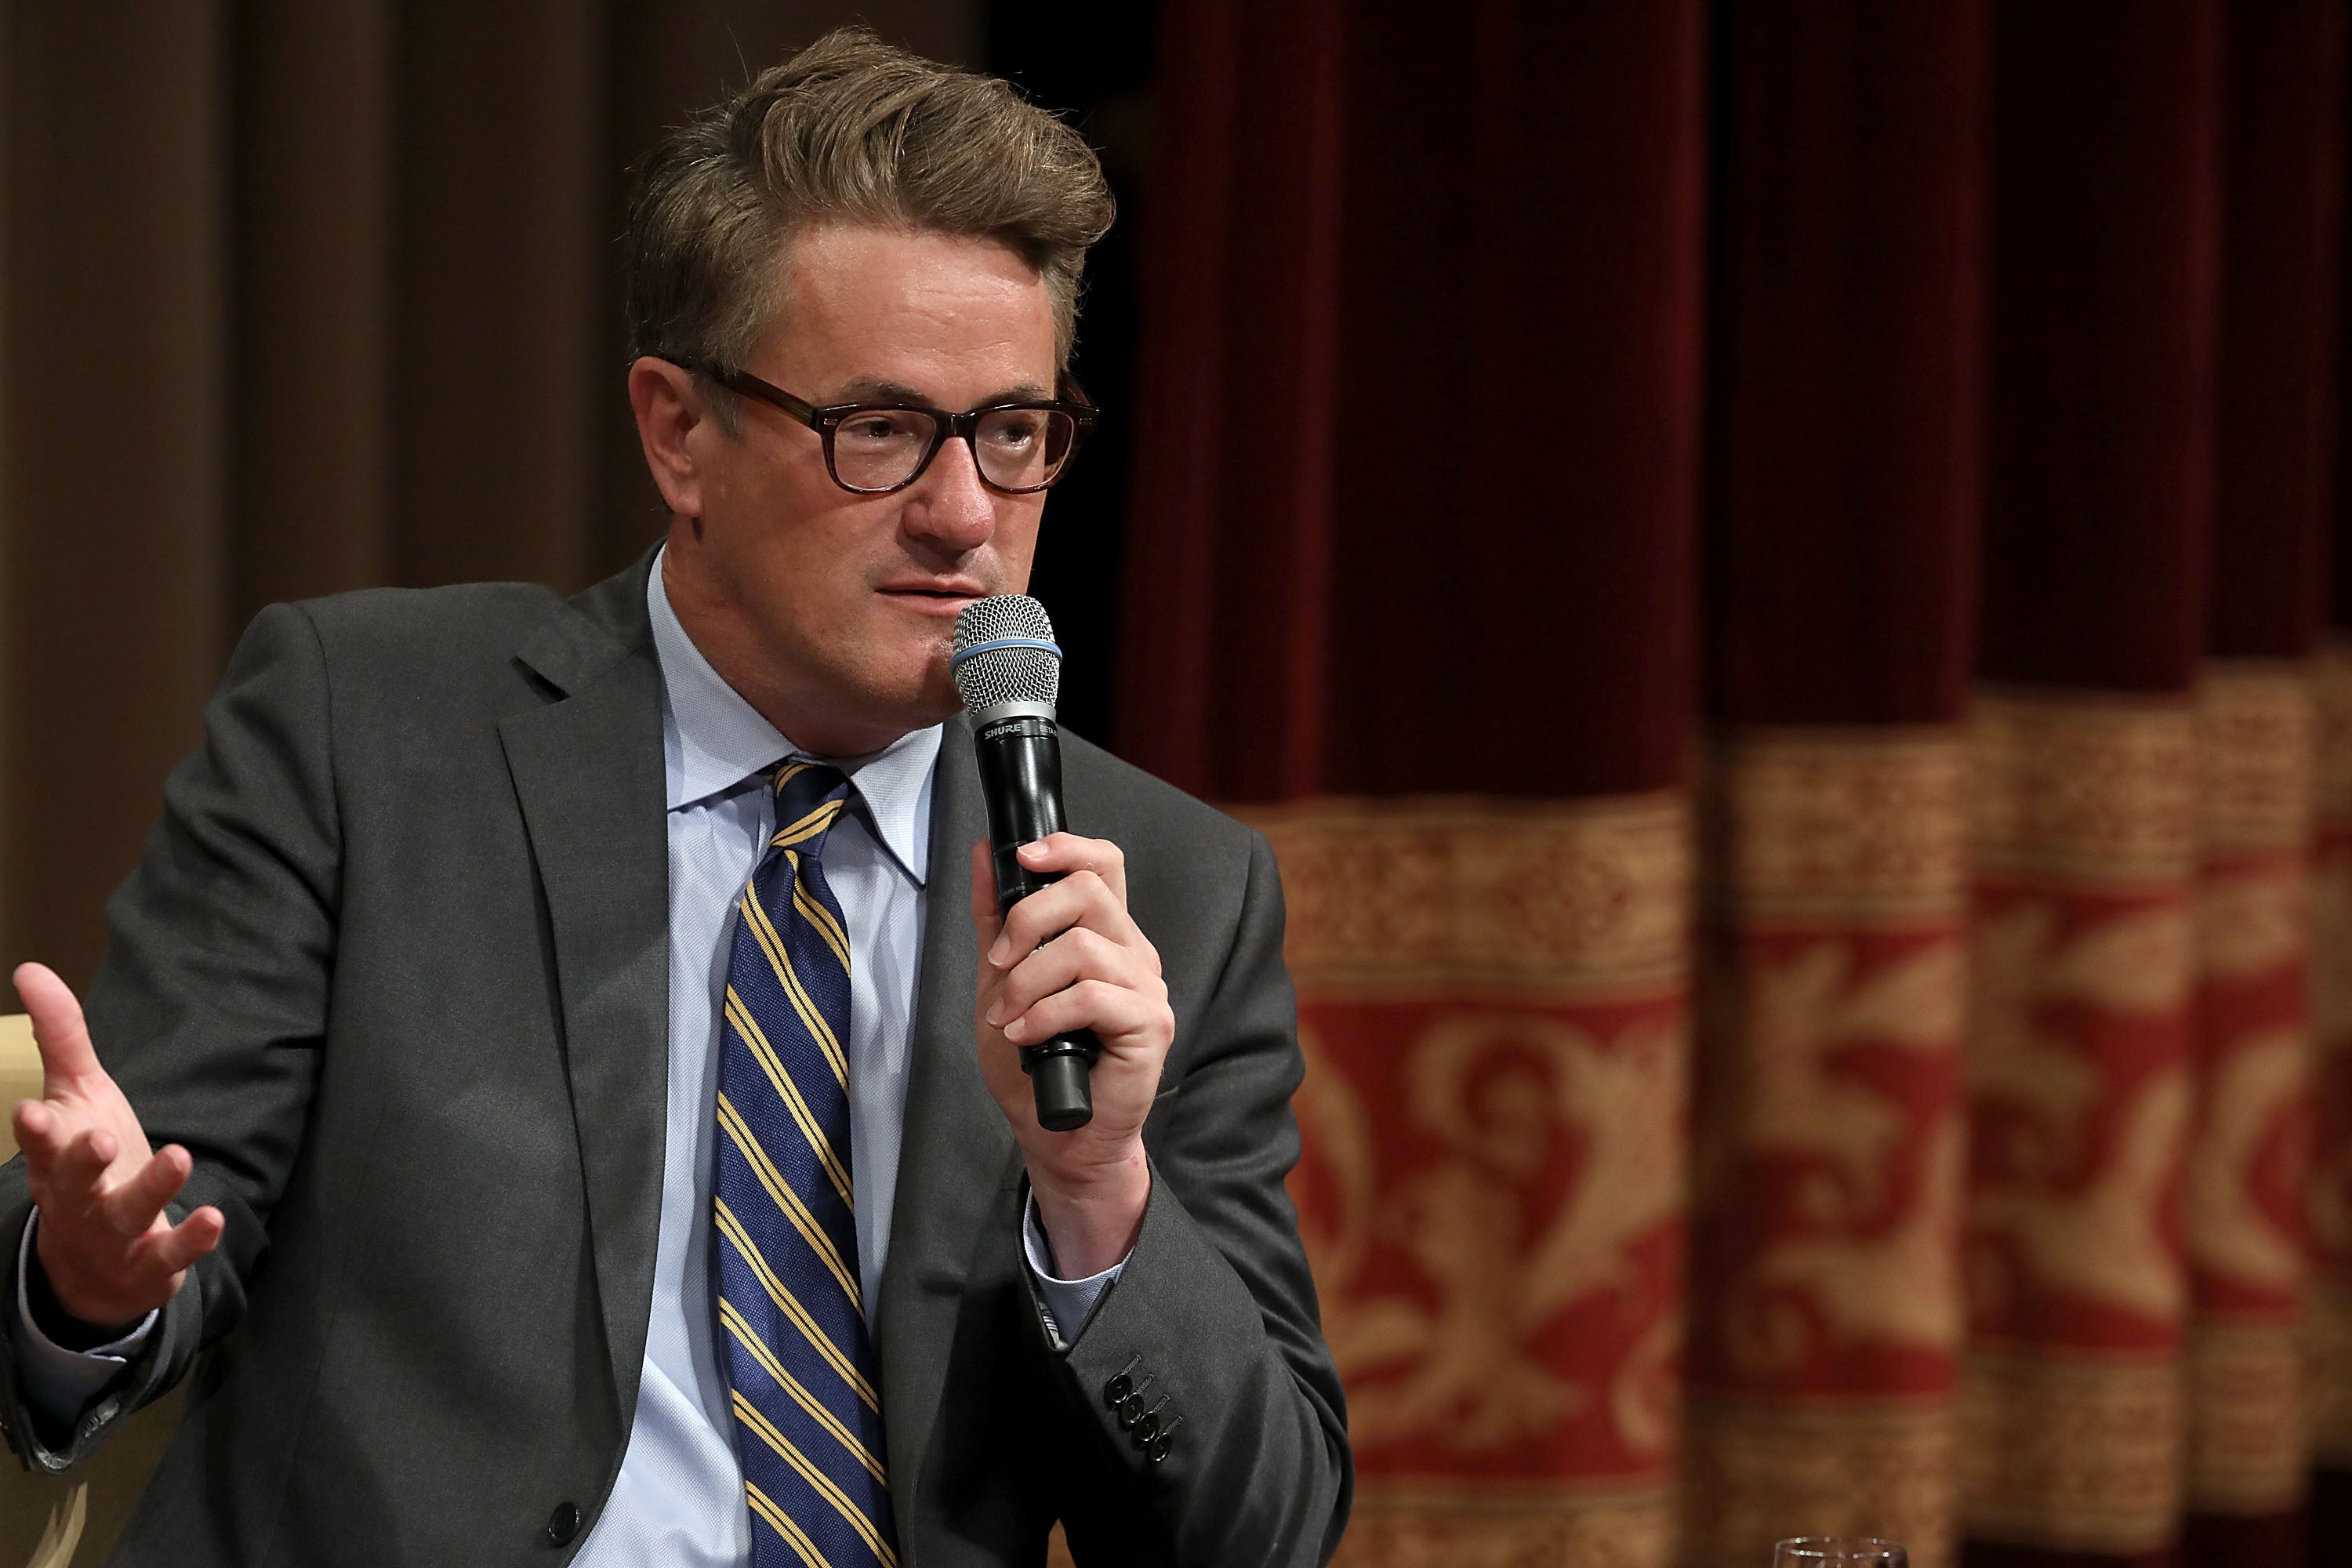 File: Joe Scarborough, a one-time friend of former president Donald Trump, does not hold back as he calls his supporters ‘cult’ in the light of CBS polls